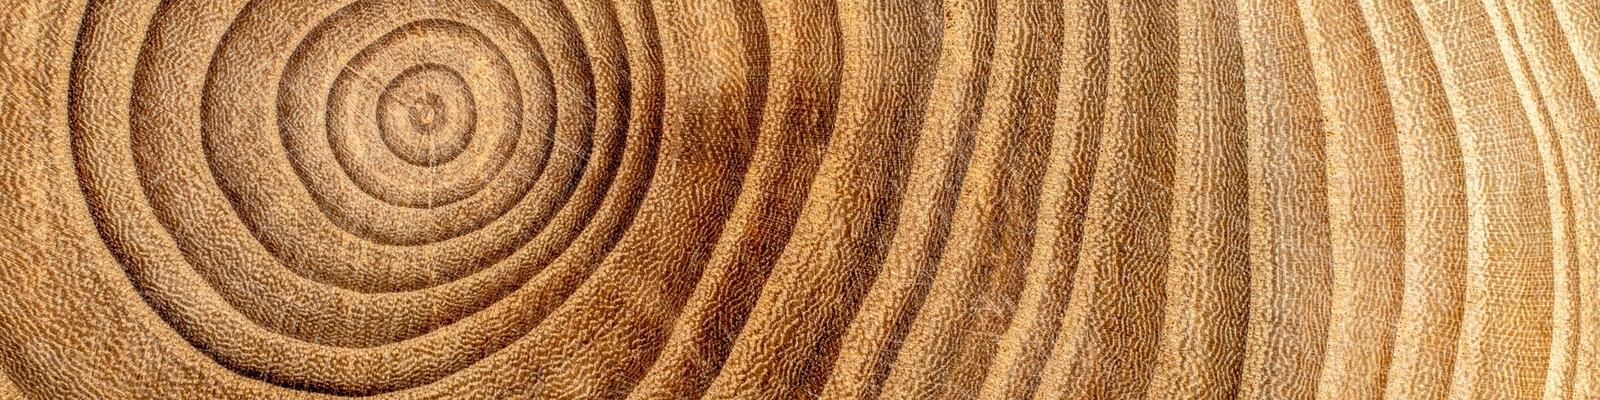 Wood and its features